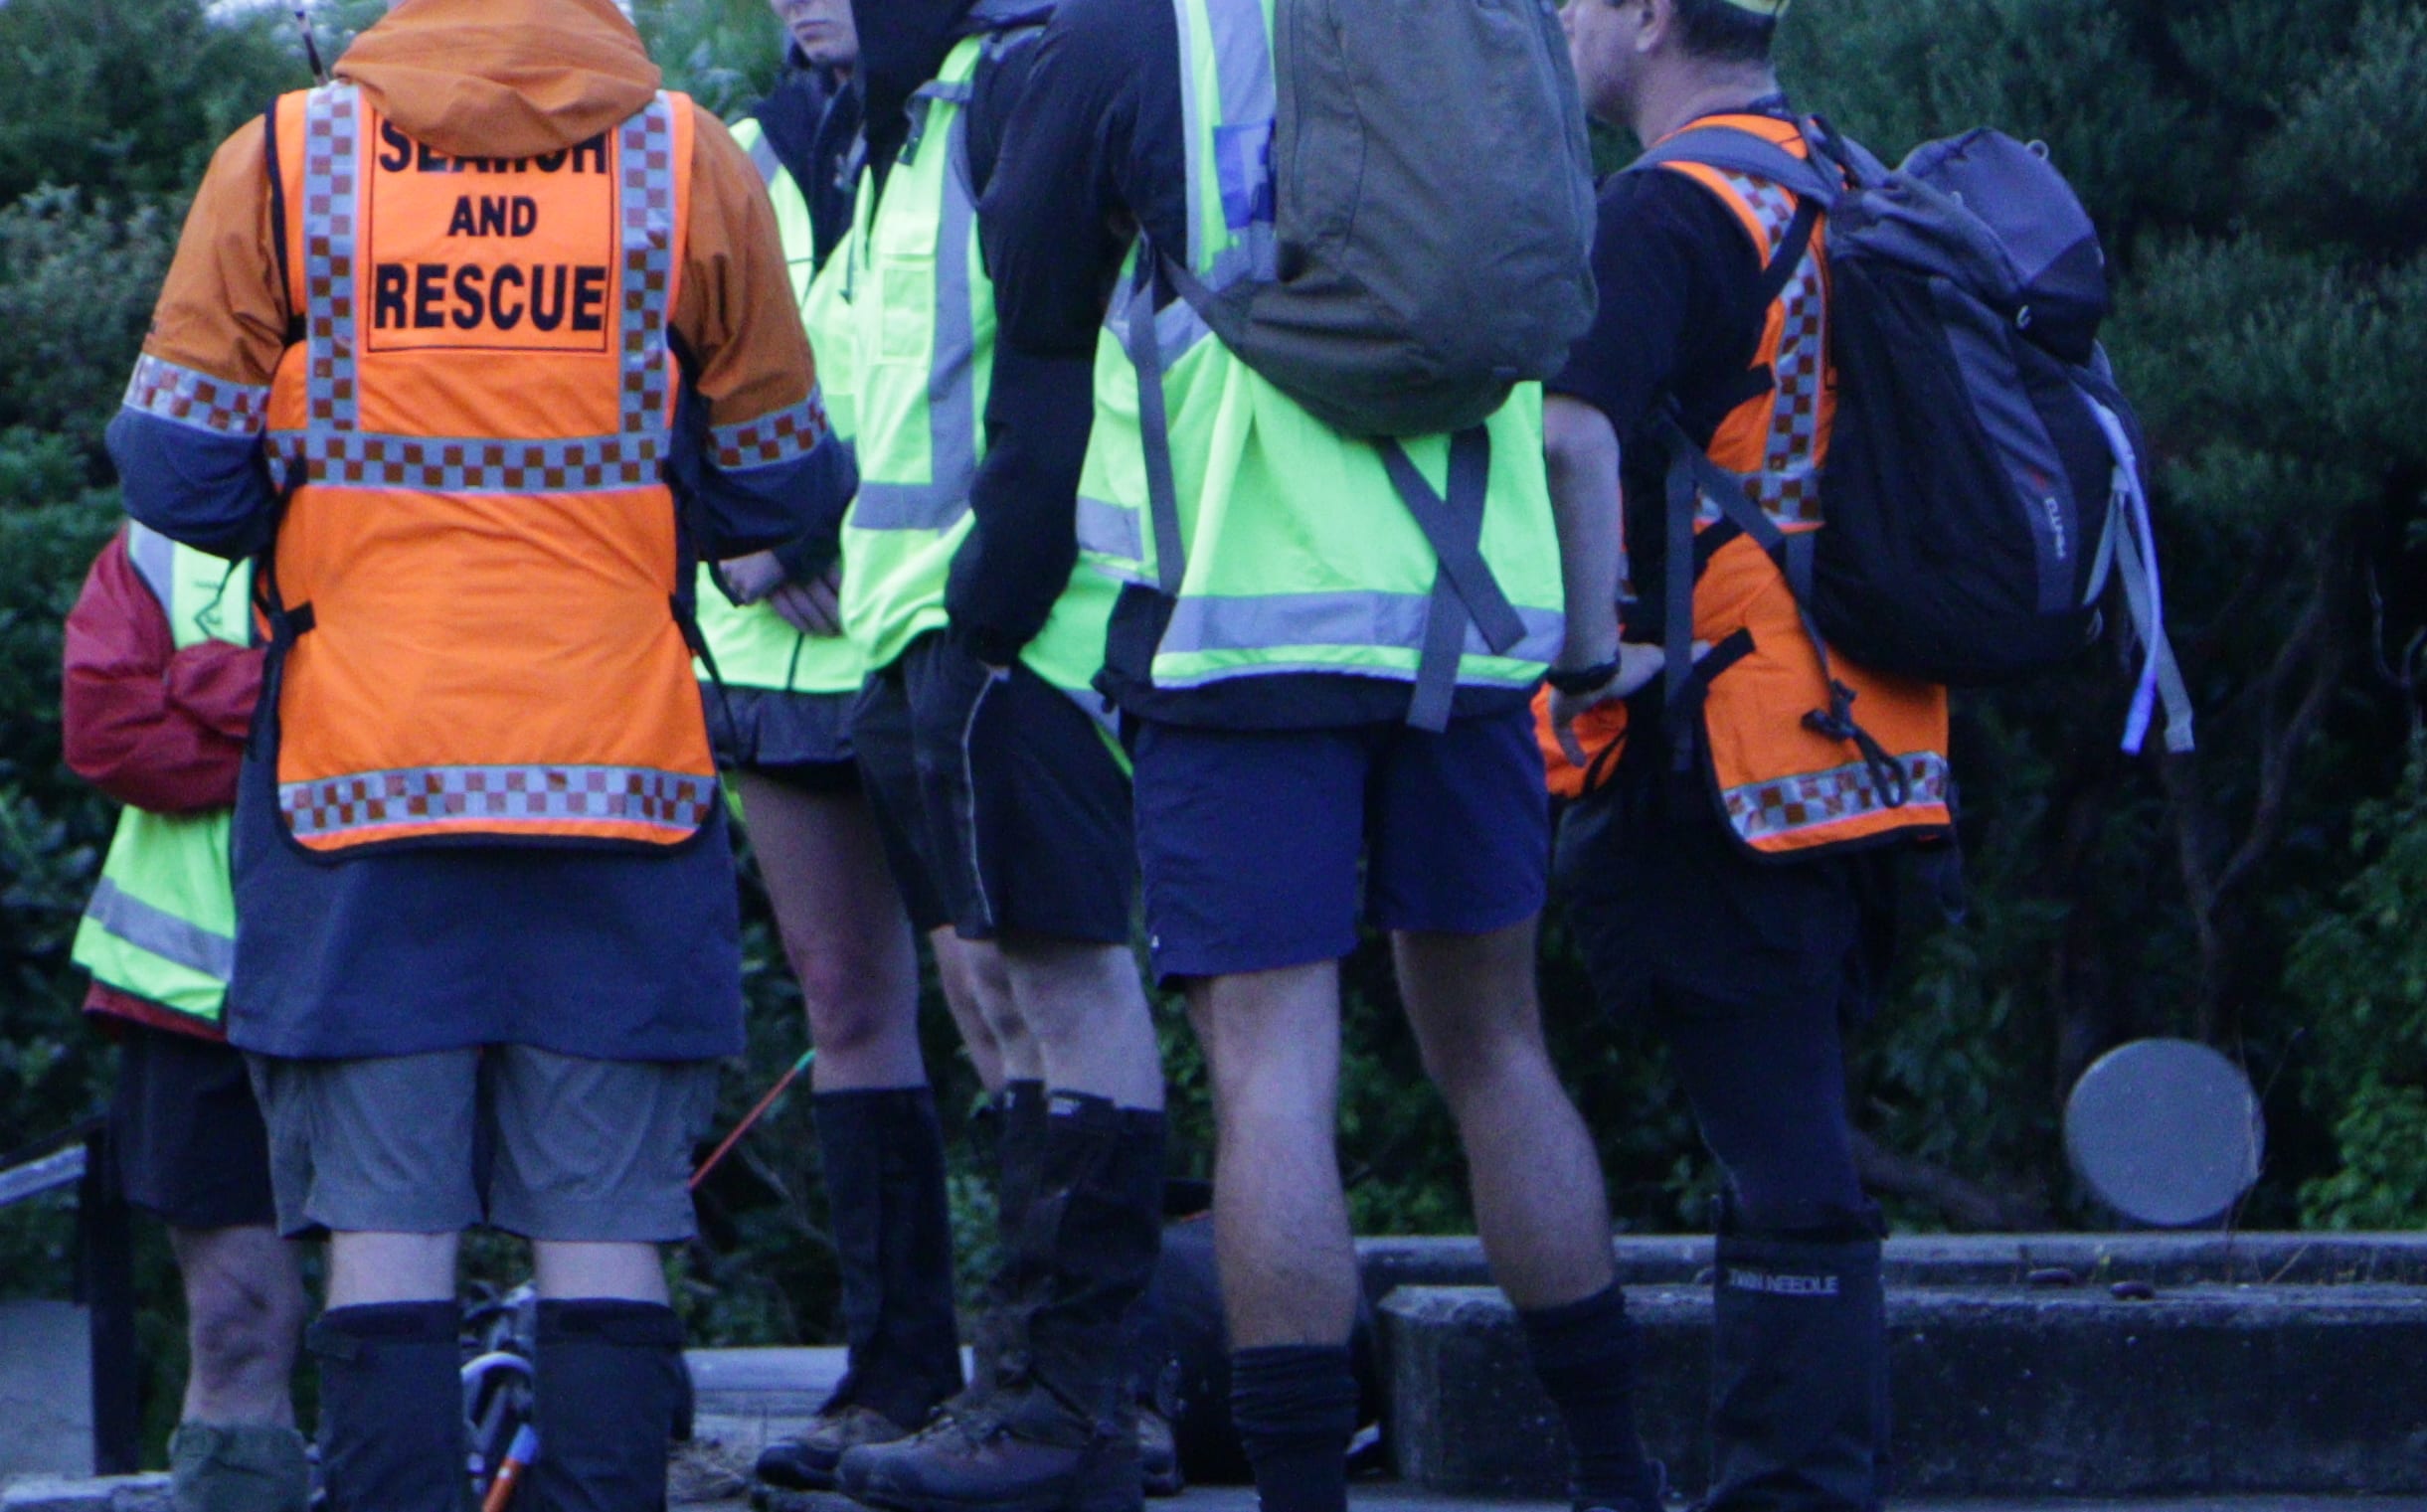 Police and volunteer search and rescue staff preparing to search for missing Auckland woman Kim Bambus.